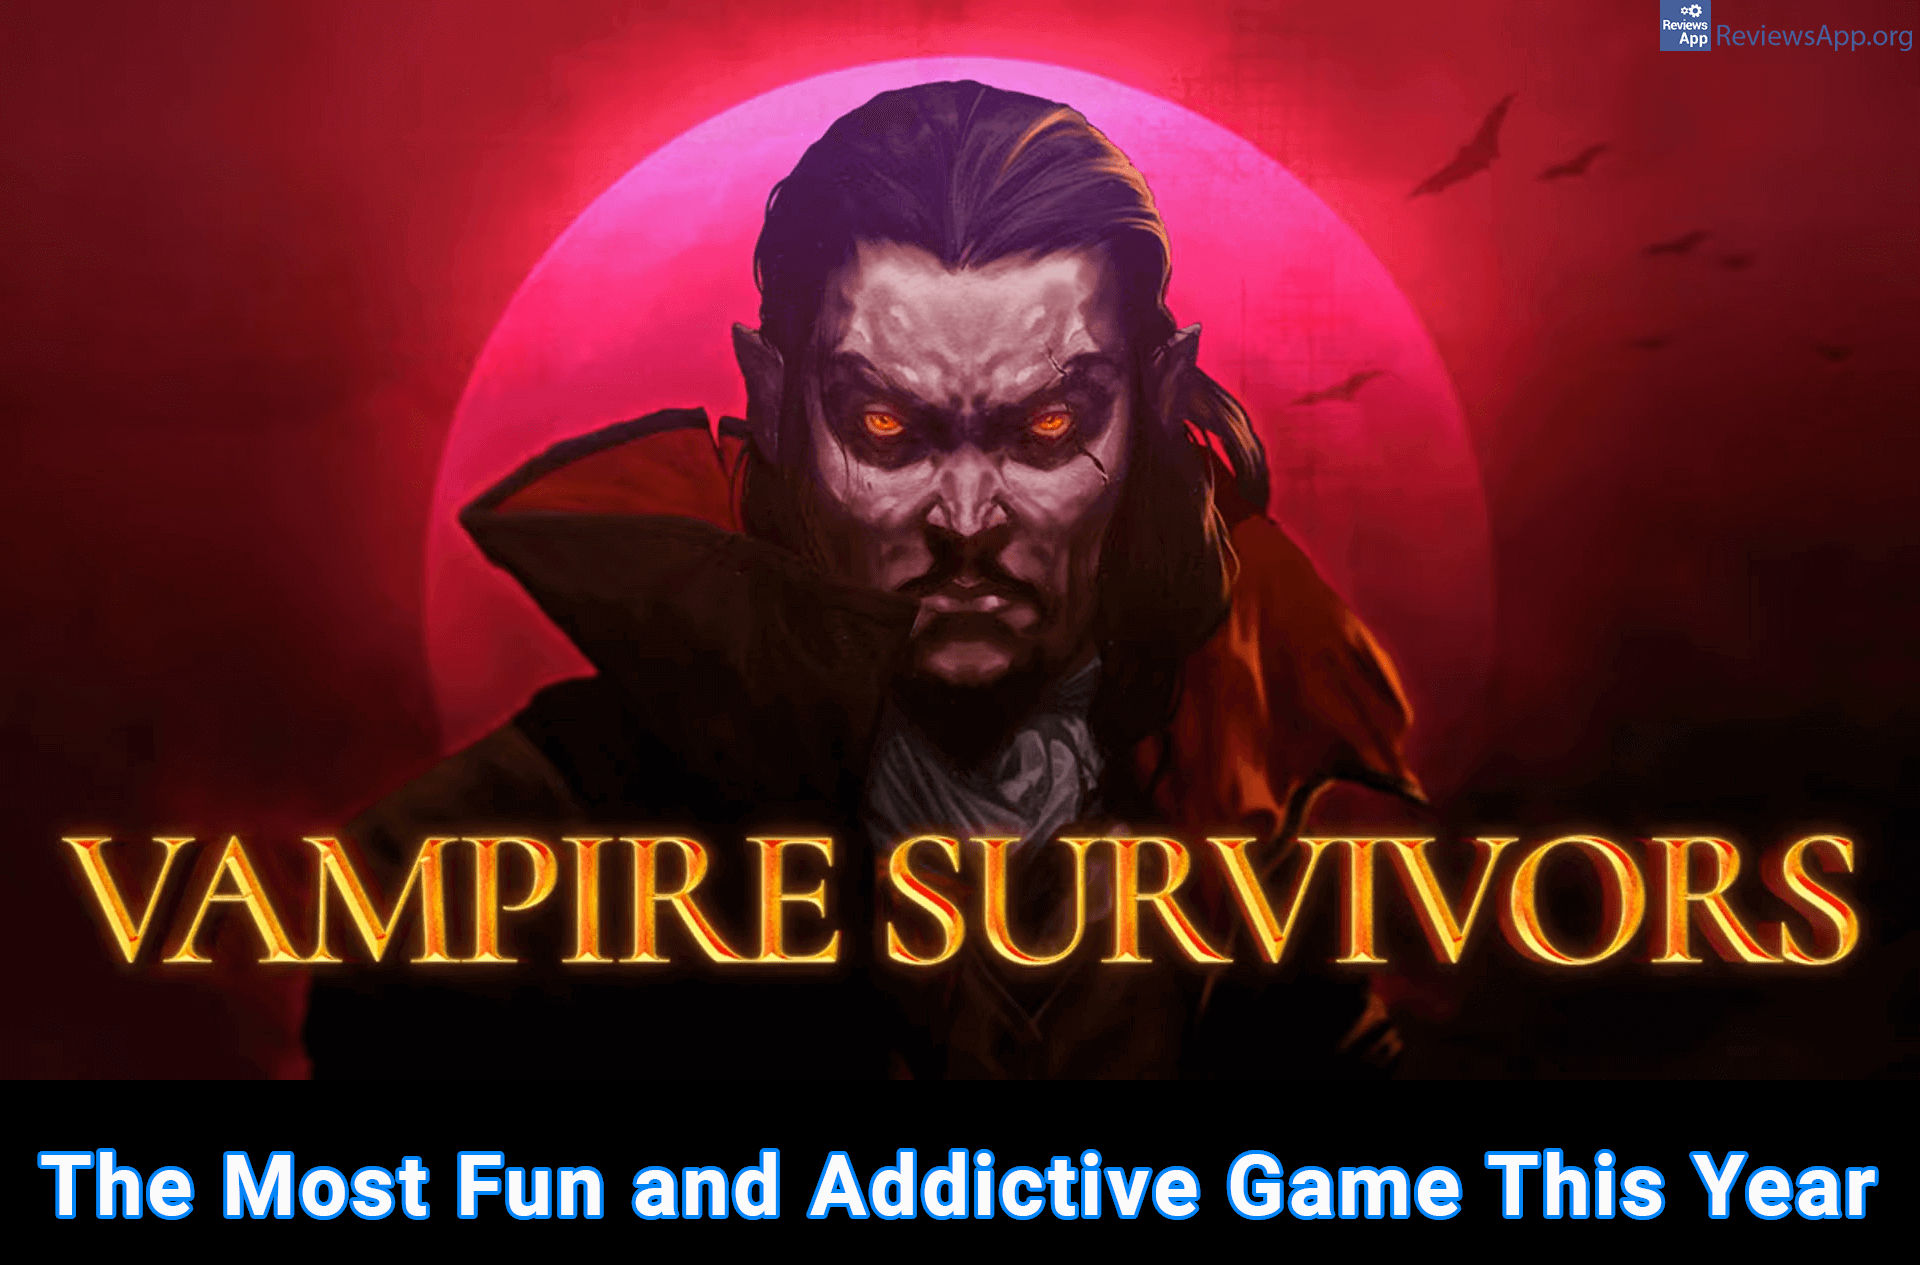 Vampire Survivors – The Most Fun and Addictive Game This Year